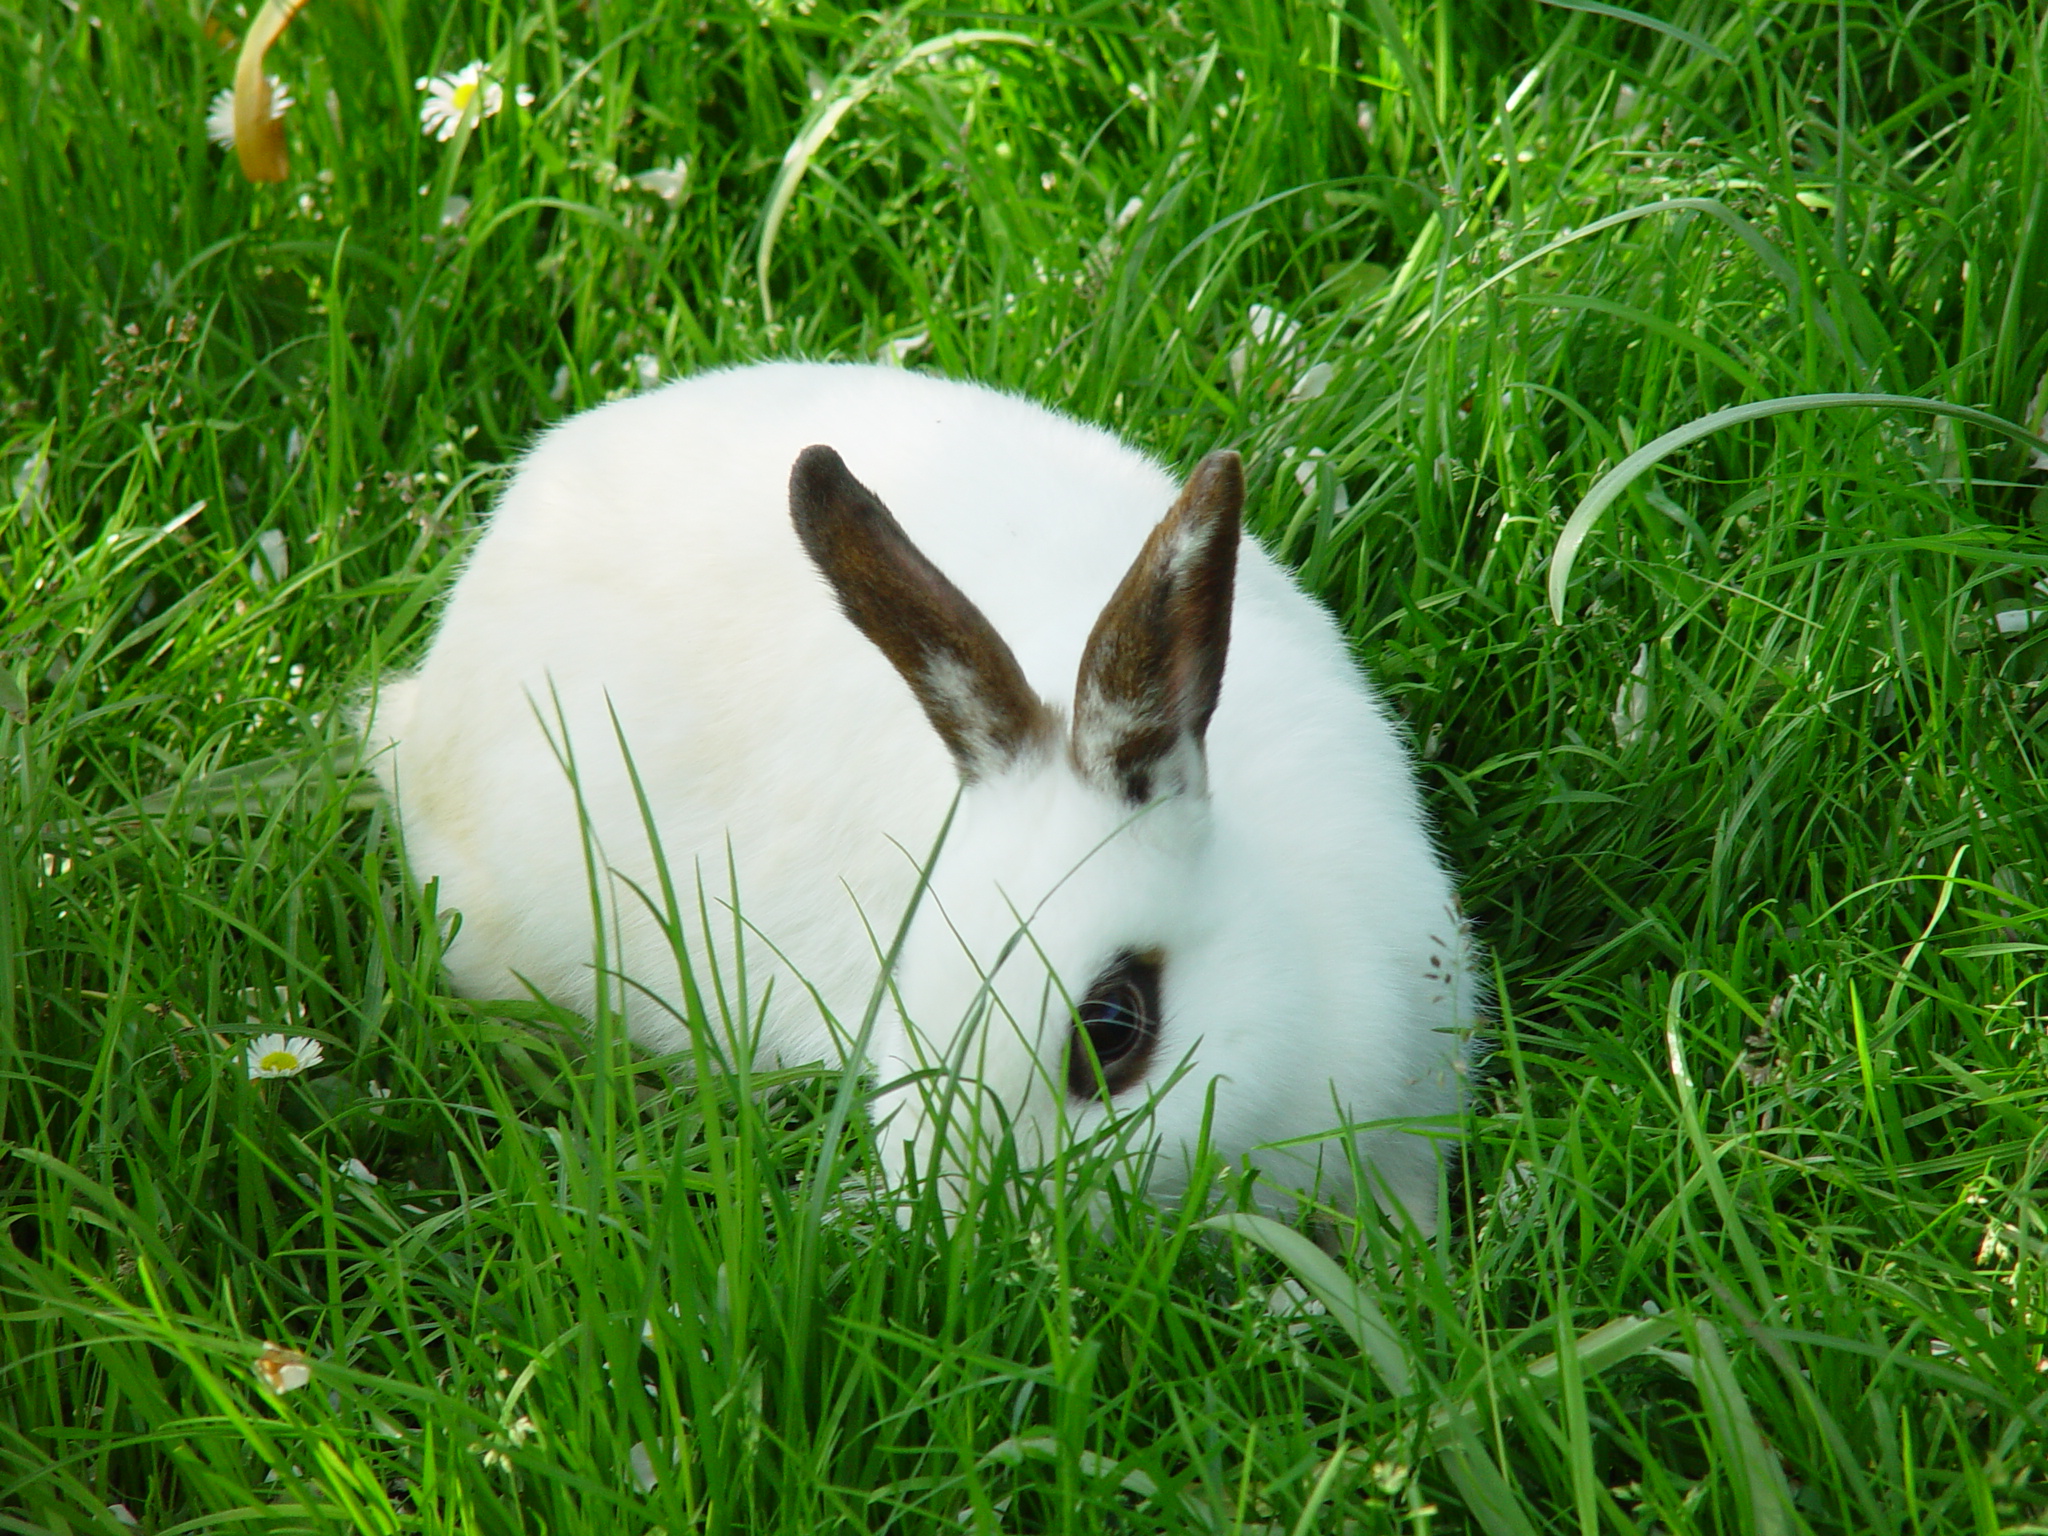 Adventurous Bunnies Explore the Lawn and Tall Grasses 3